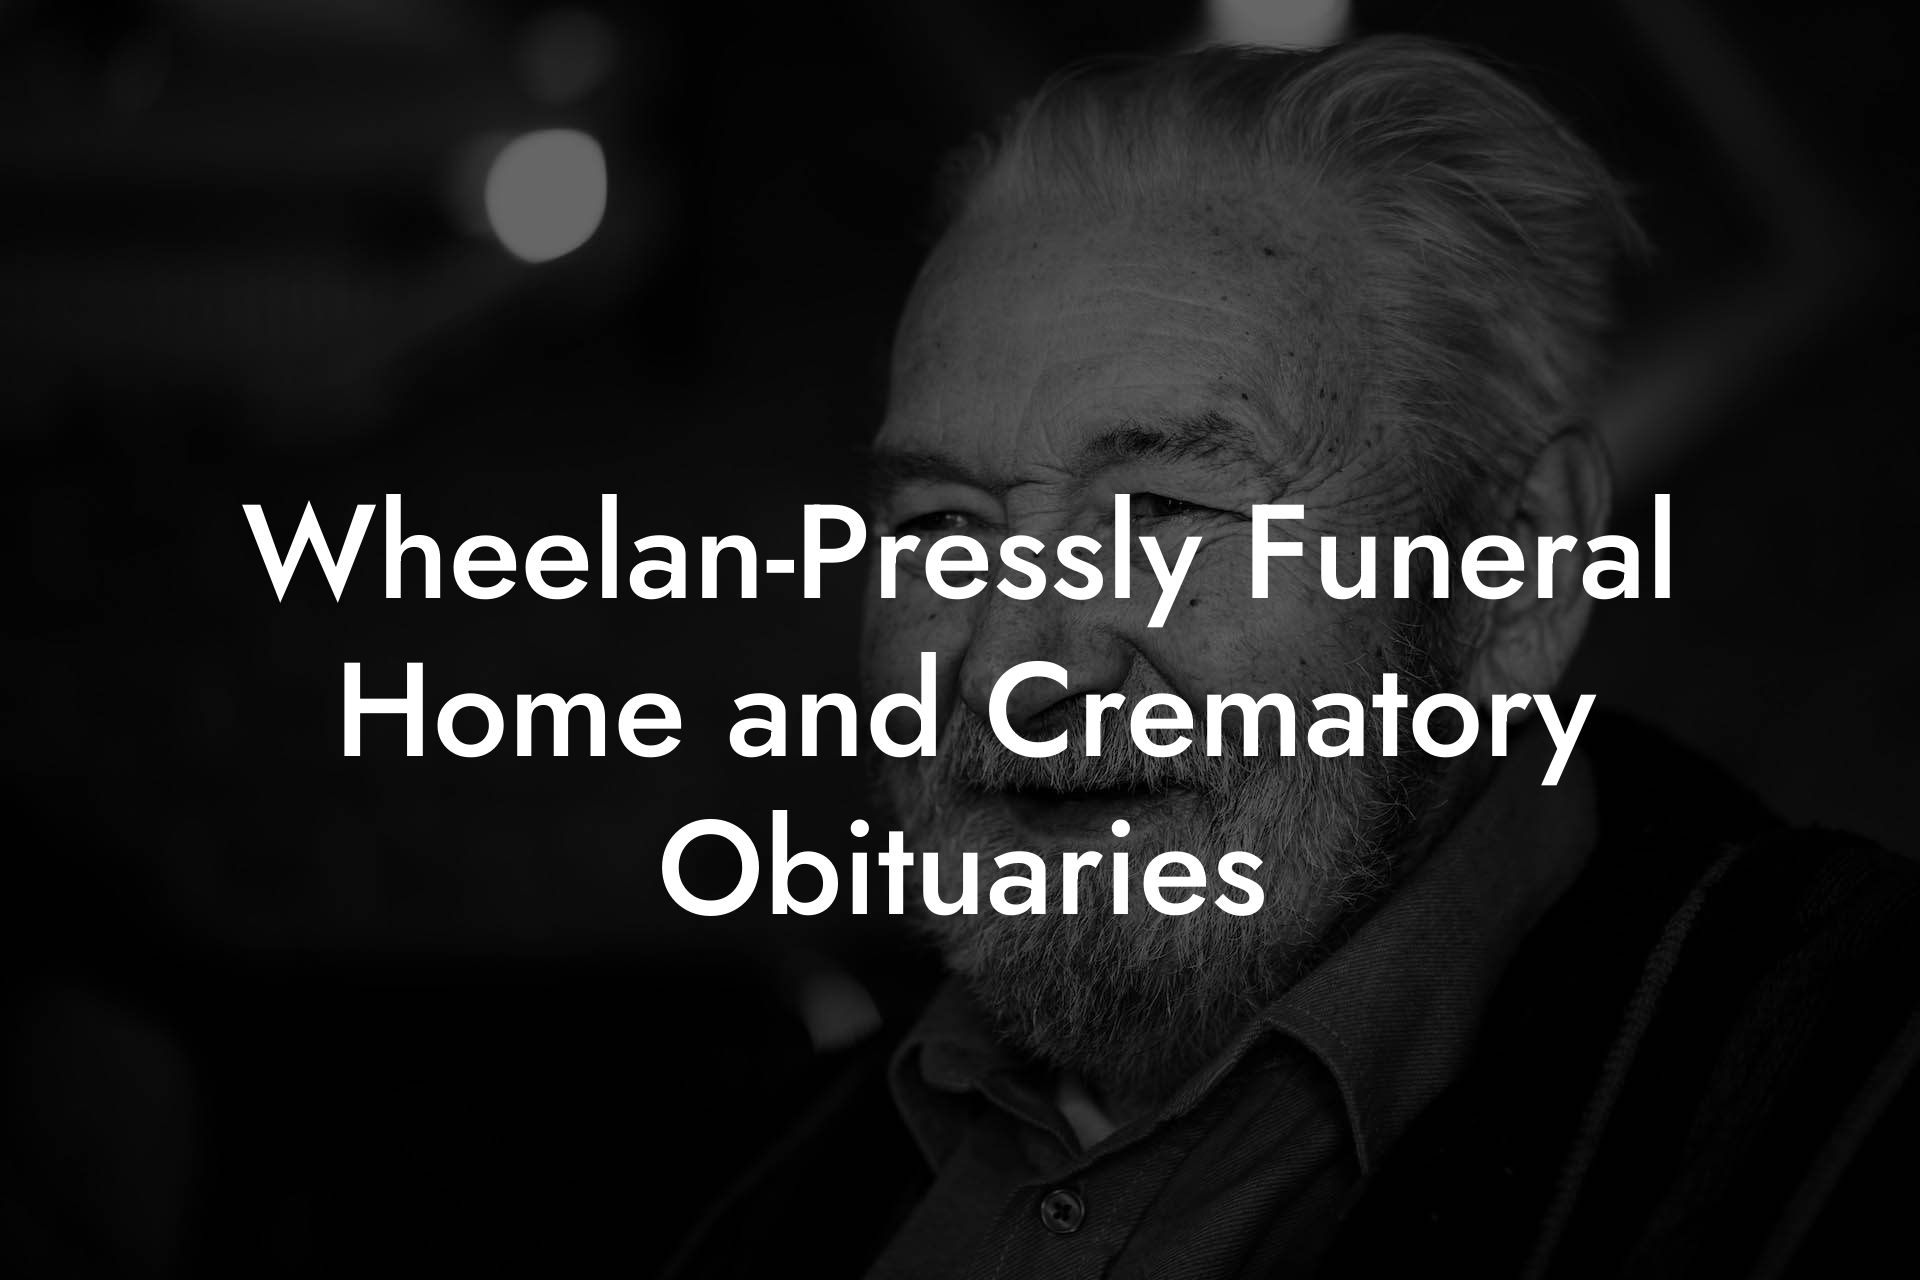 Wheelan-Pressly Funeral Home and Crematory Obituaries